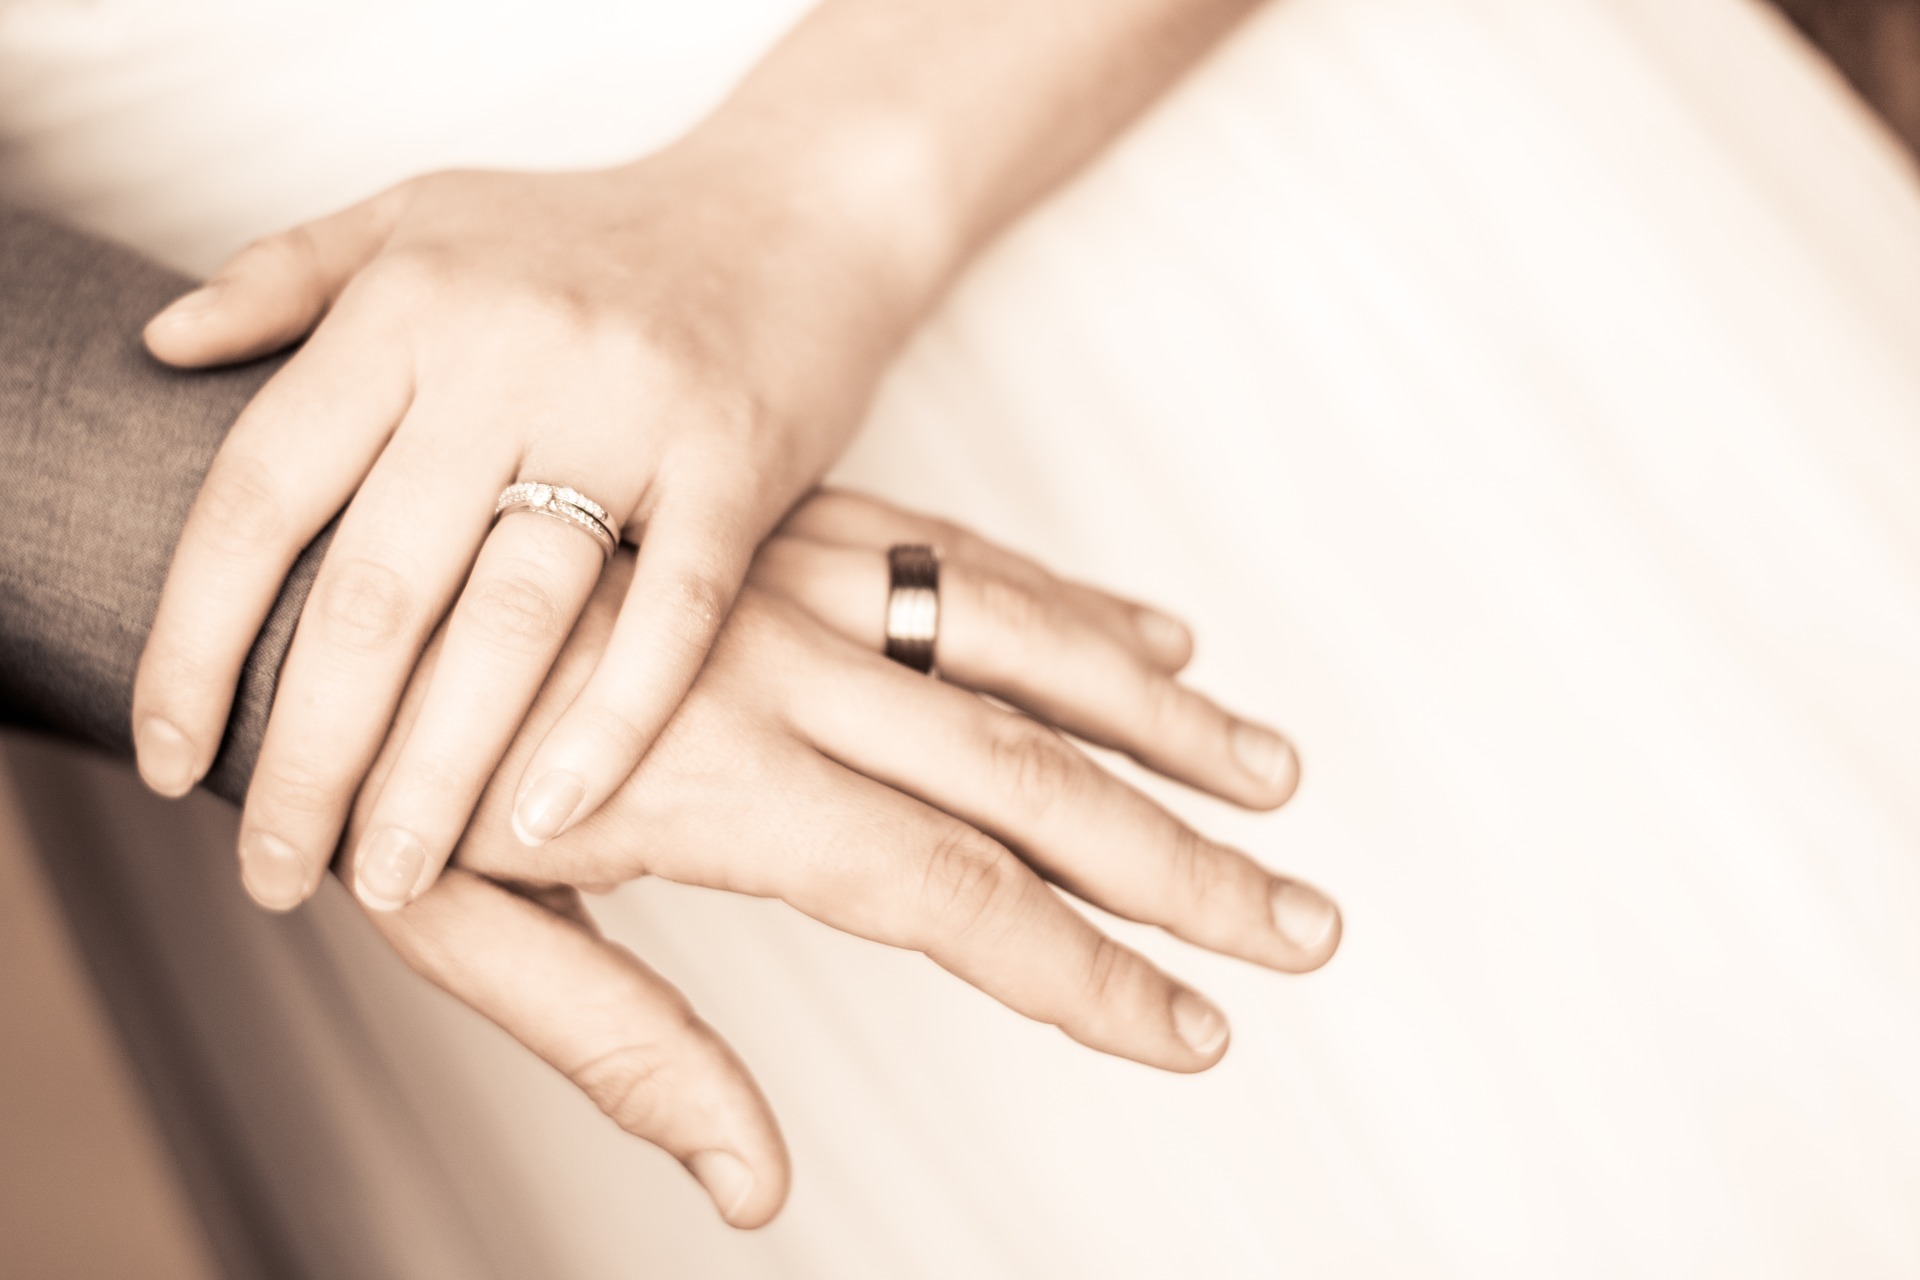 Are You Likely To Lose Your Wedding Ring Or Engagement Ring?